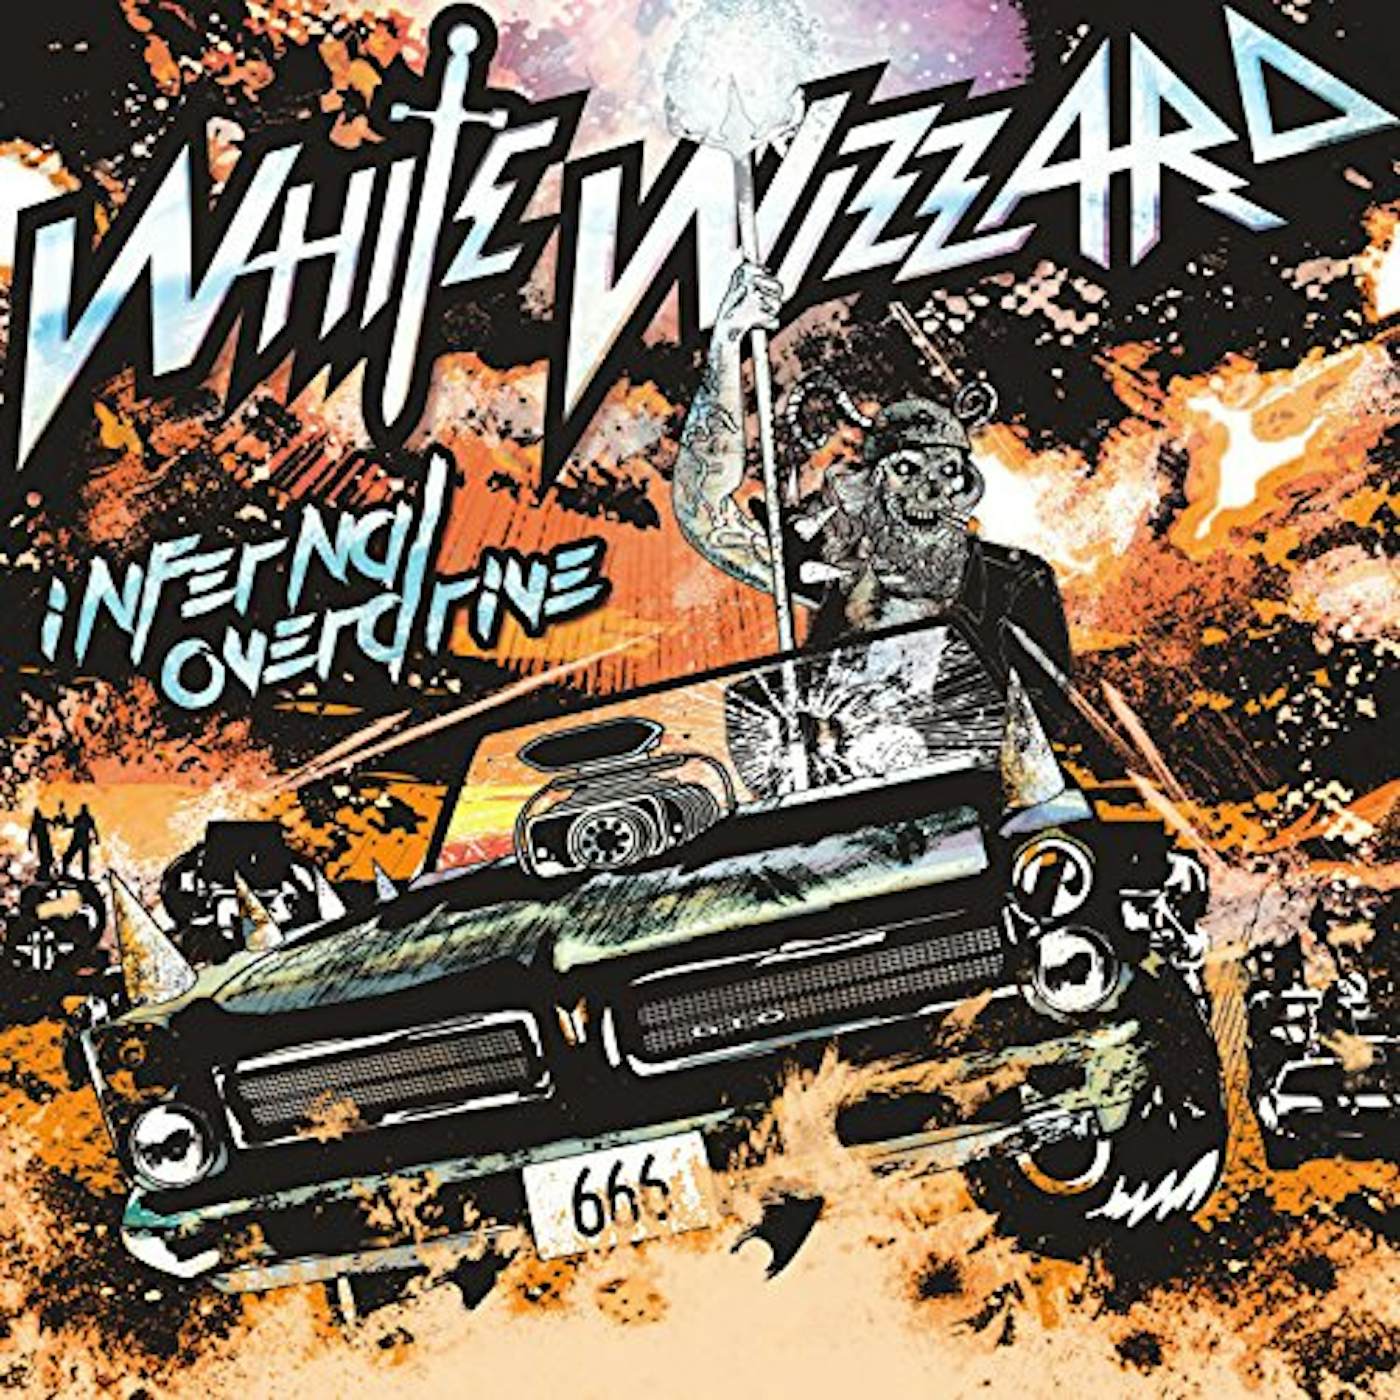 White Wizzard INFERNAL OVERDRIVE CD